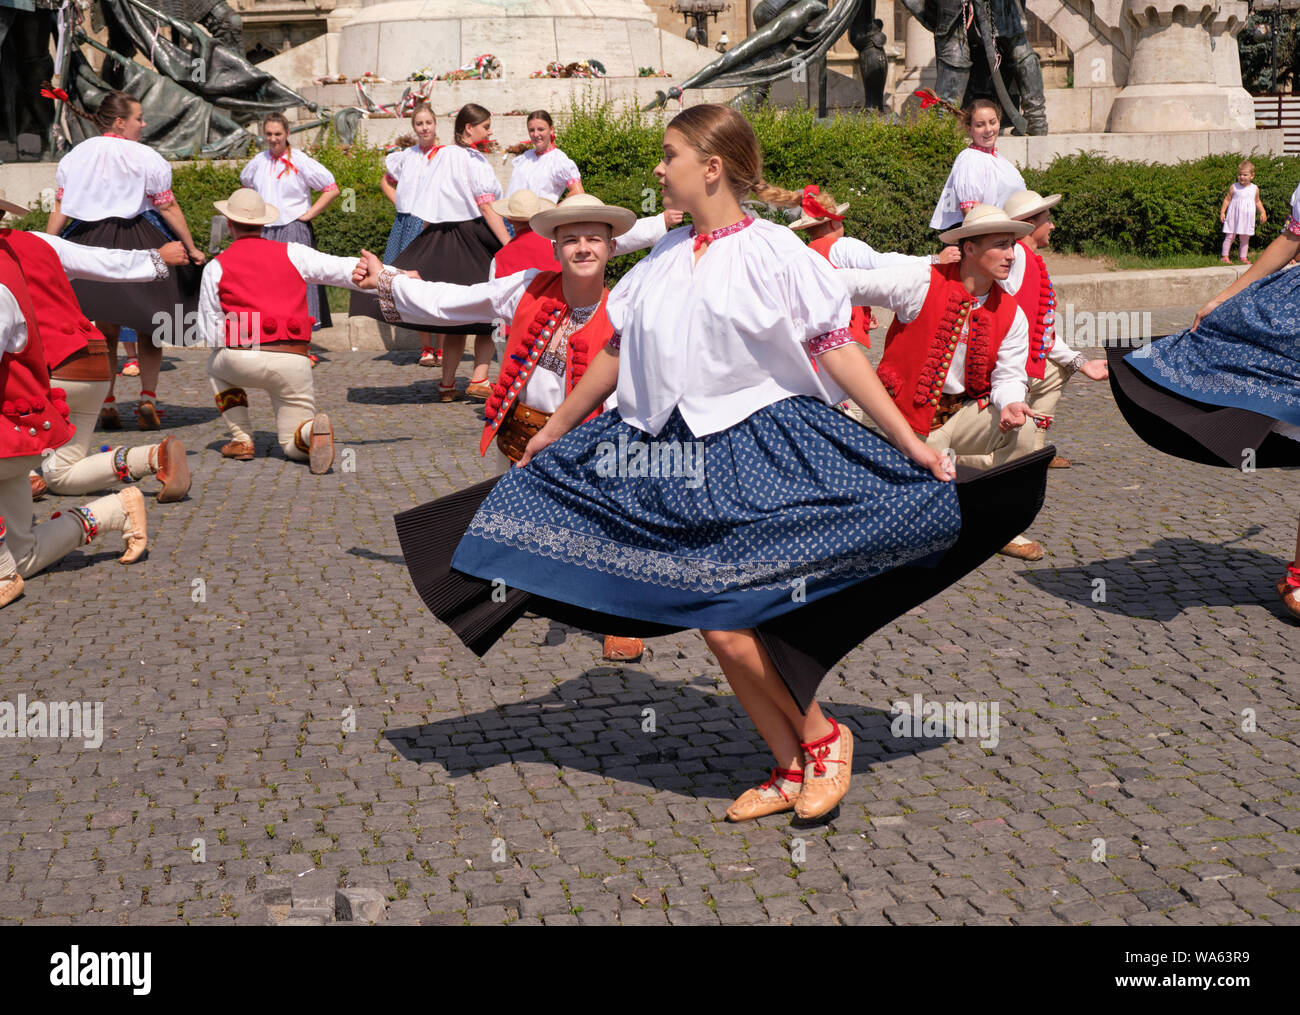 Polish Traditional dance troop in folkloric customs with a public performance in square. Couple number, with man pleading lady.   Cluj, Romania, Stock Photo